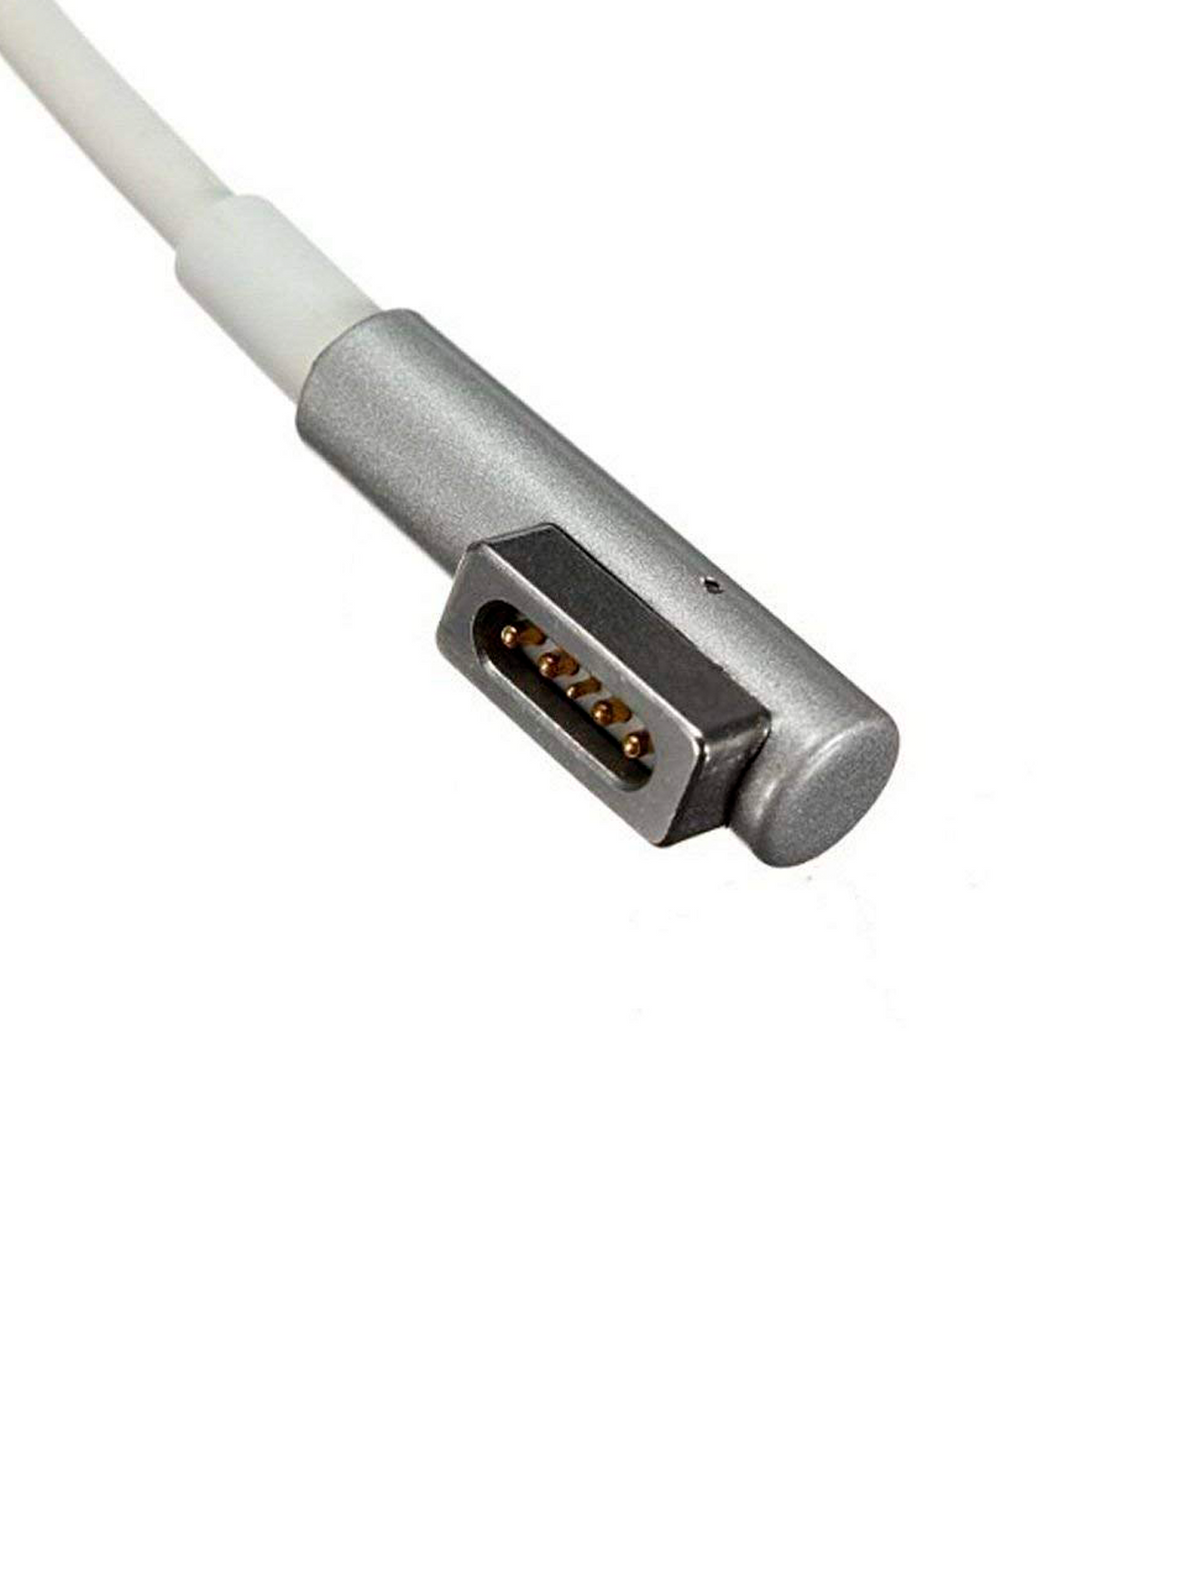 85W MagSafe 1 Power Adapter With Attached Cable Compatible For MacBook (L-Style) (Used OEM Pull)